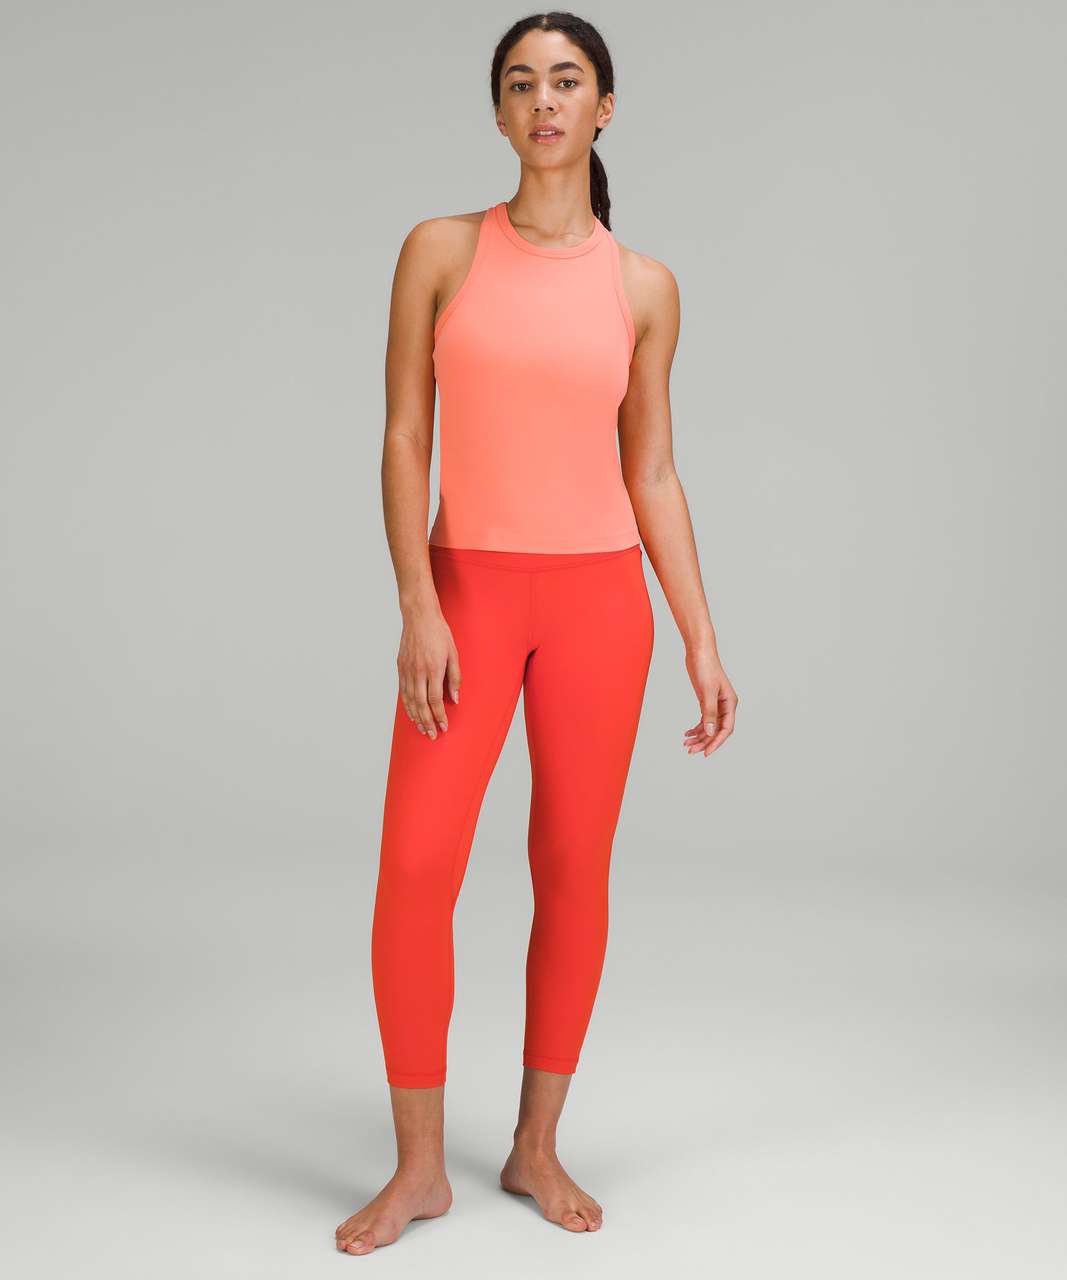 NWT Lululemon Align HR Pant 25 Size 8 or 10 Soleil SOLL Yellow NEW NWT